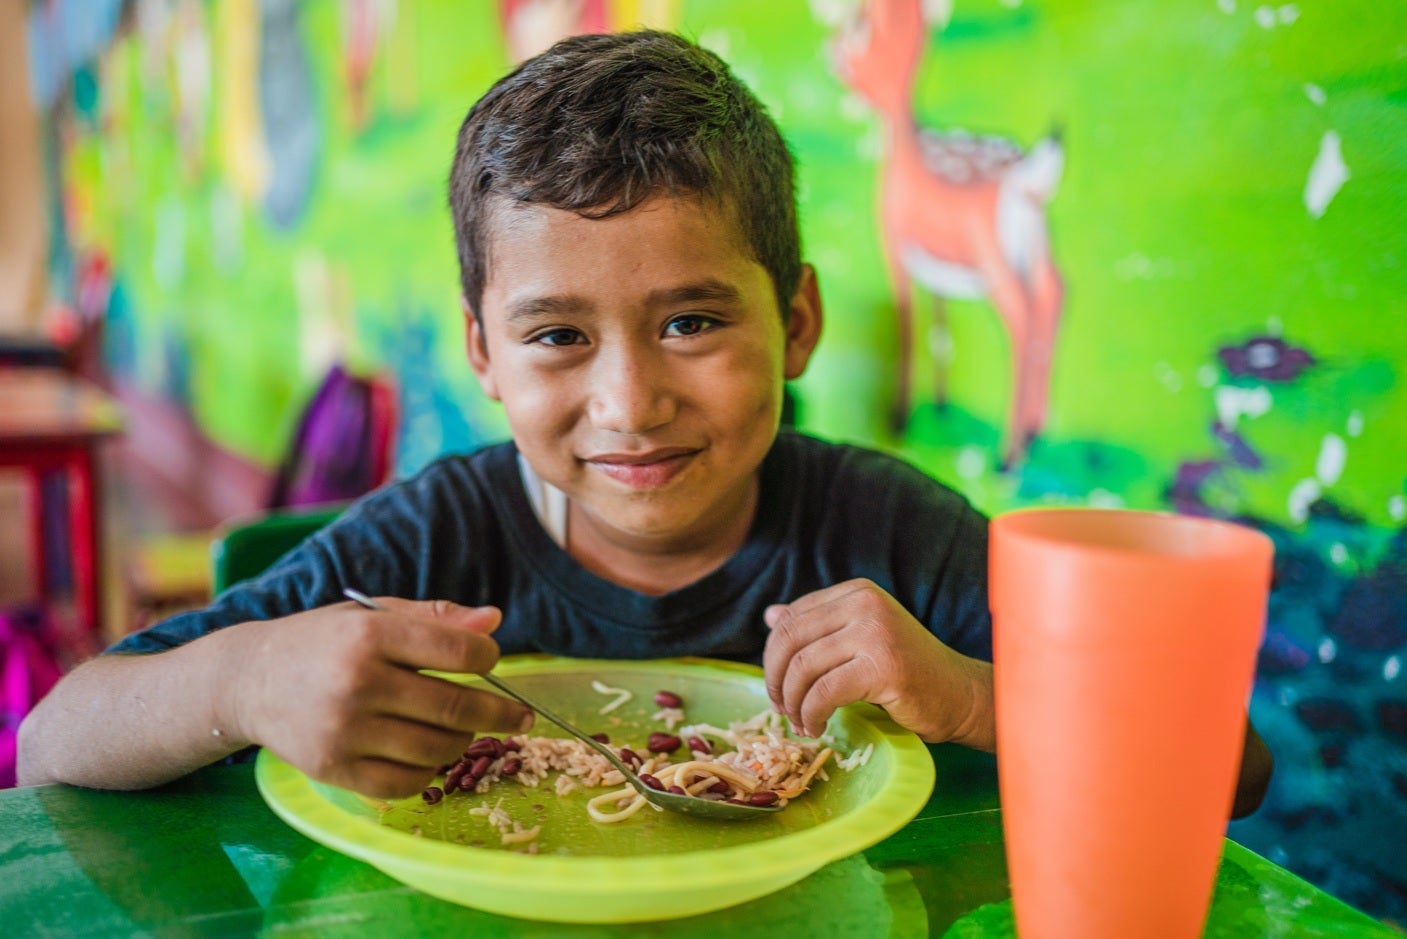 School Feeding: Latin America and The Caribbean Opportunity to Boost Learning Outcomes